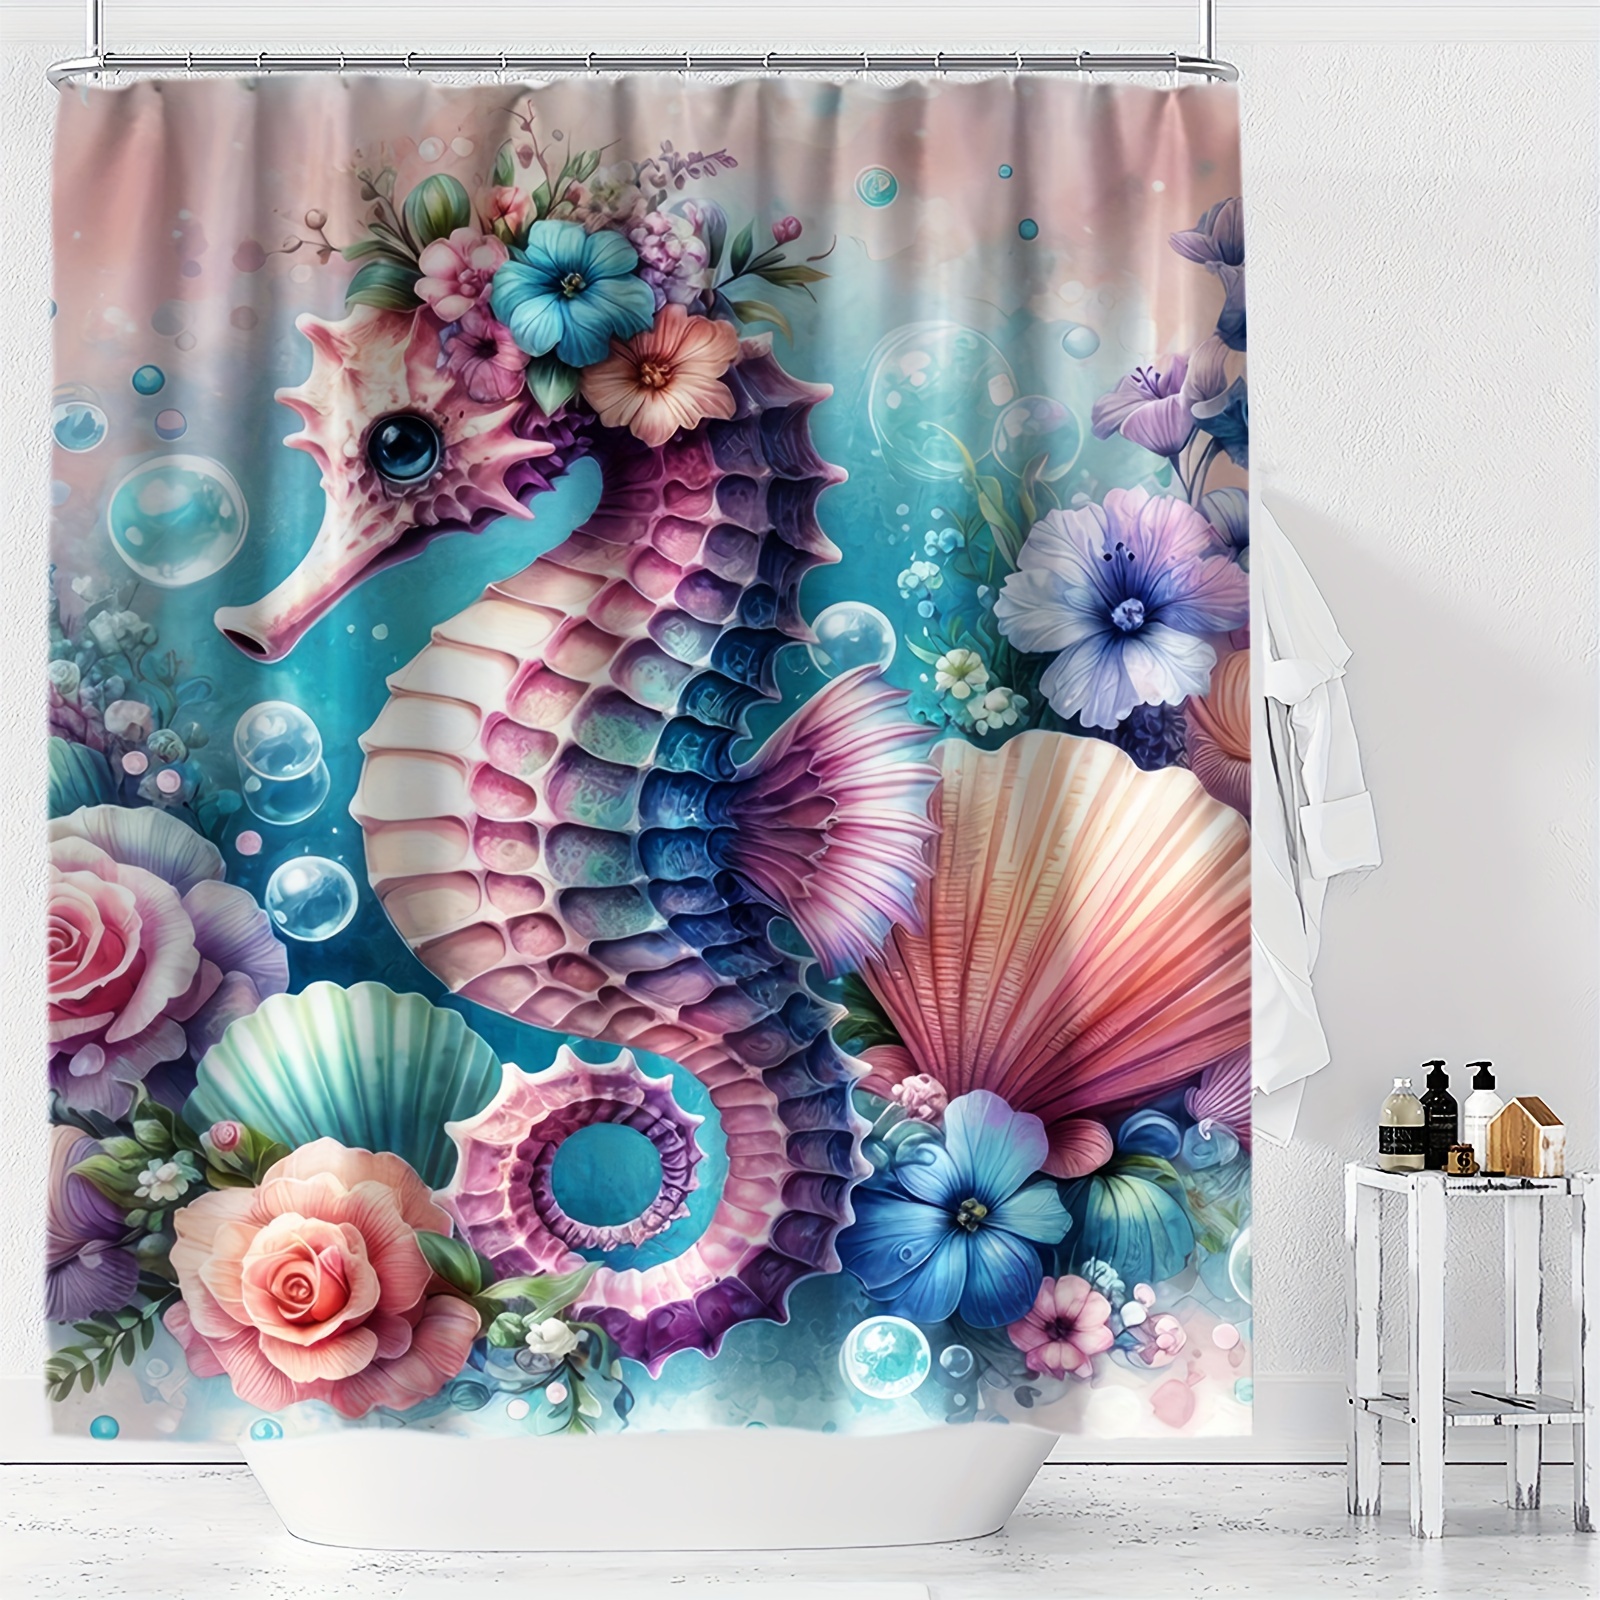 

Waterproof Seahorse & Floral Print Shower Curtain With Hooks - Machine Washable, Polyester, All-season Bathroom Decor